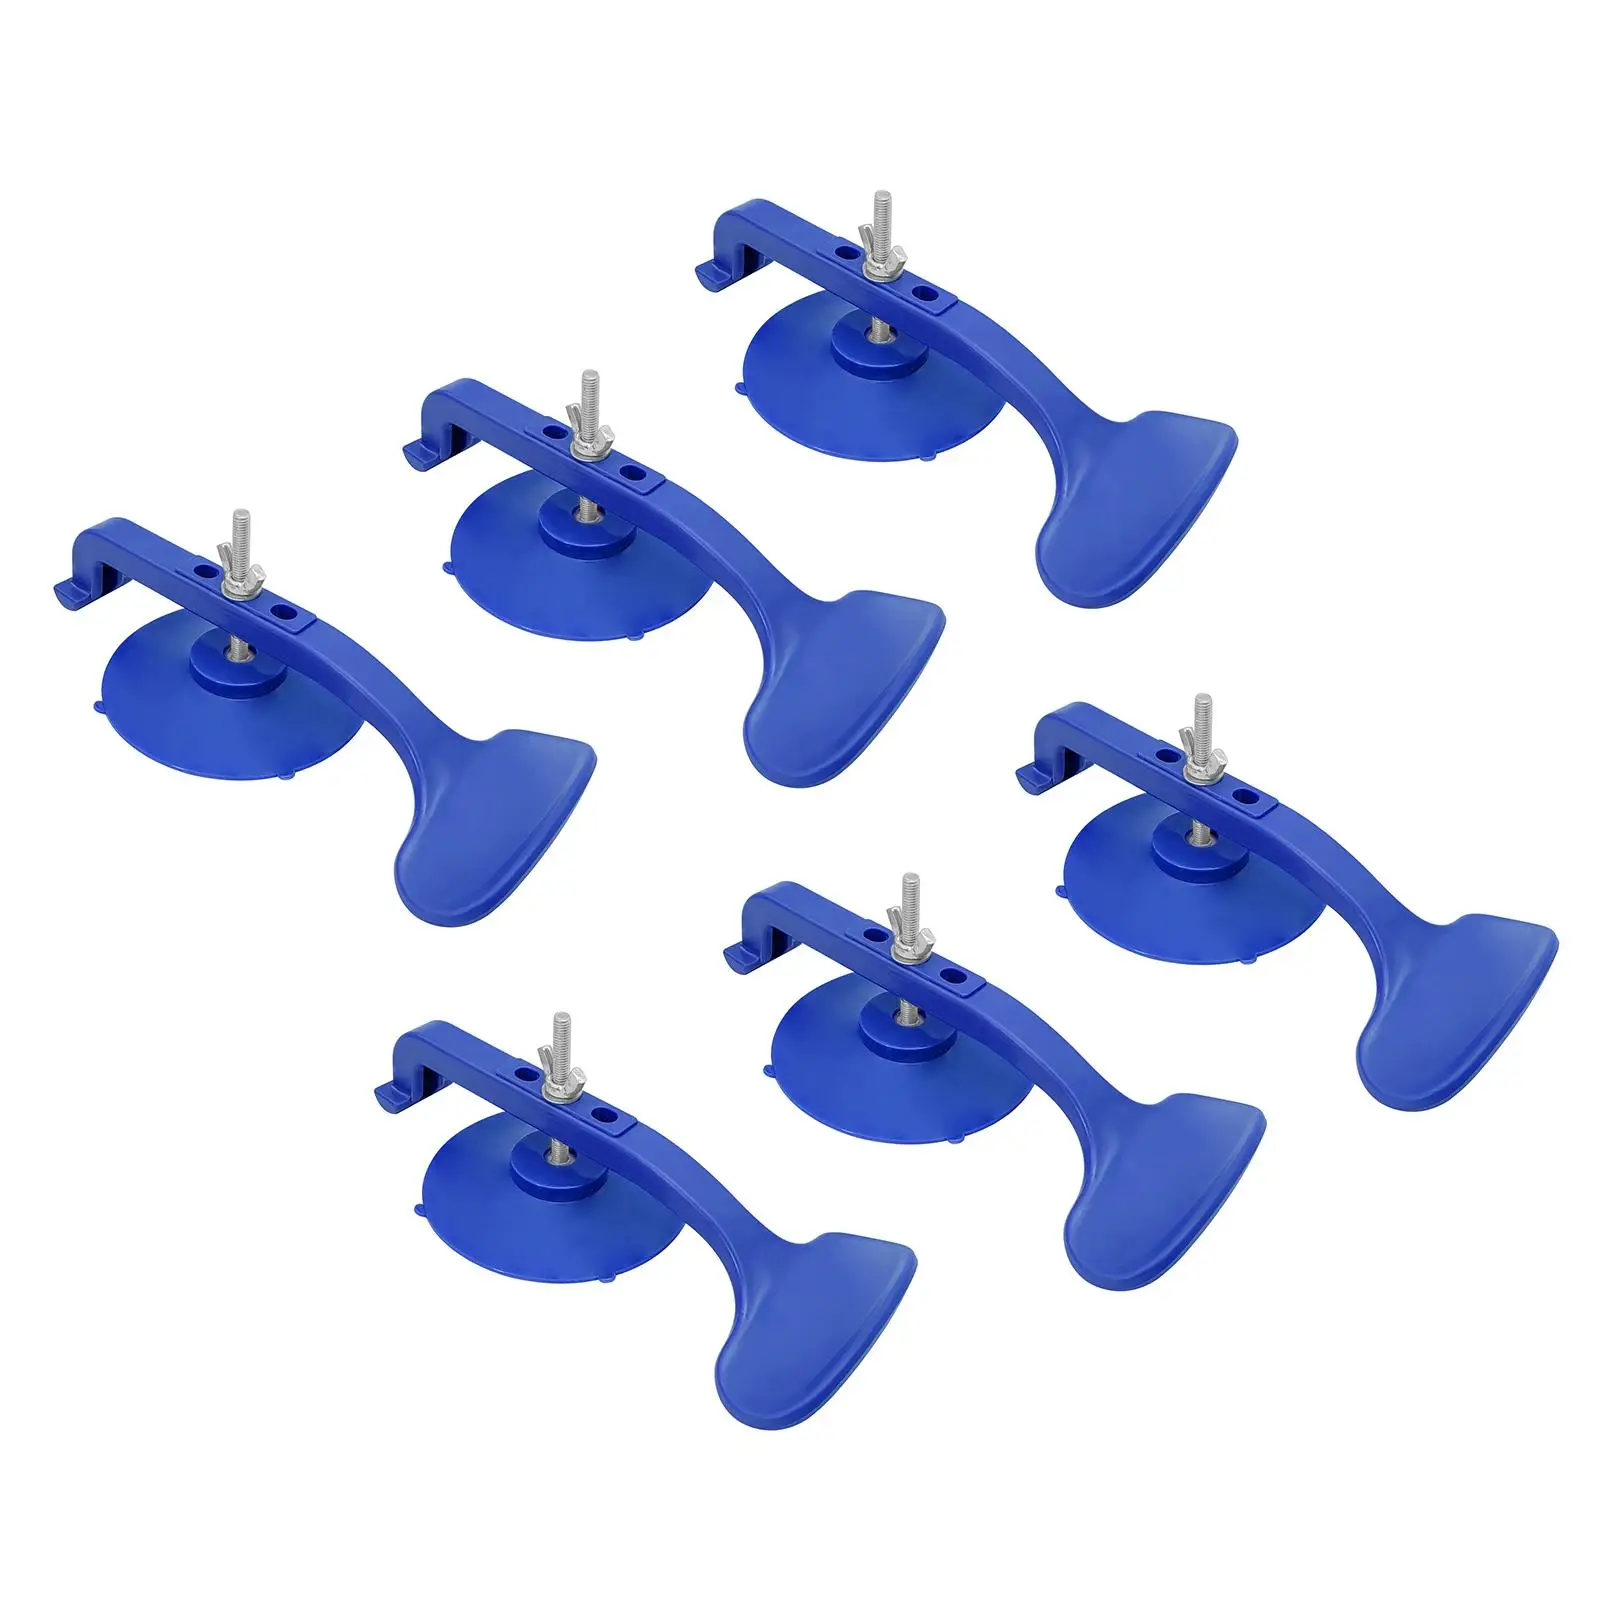 6Pcs High Quality Suction Clamp Set for Convertible Glass Windshield Repair Suction Cup Clamps Easy to Operate Quick Release